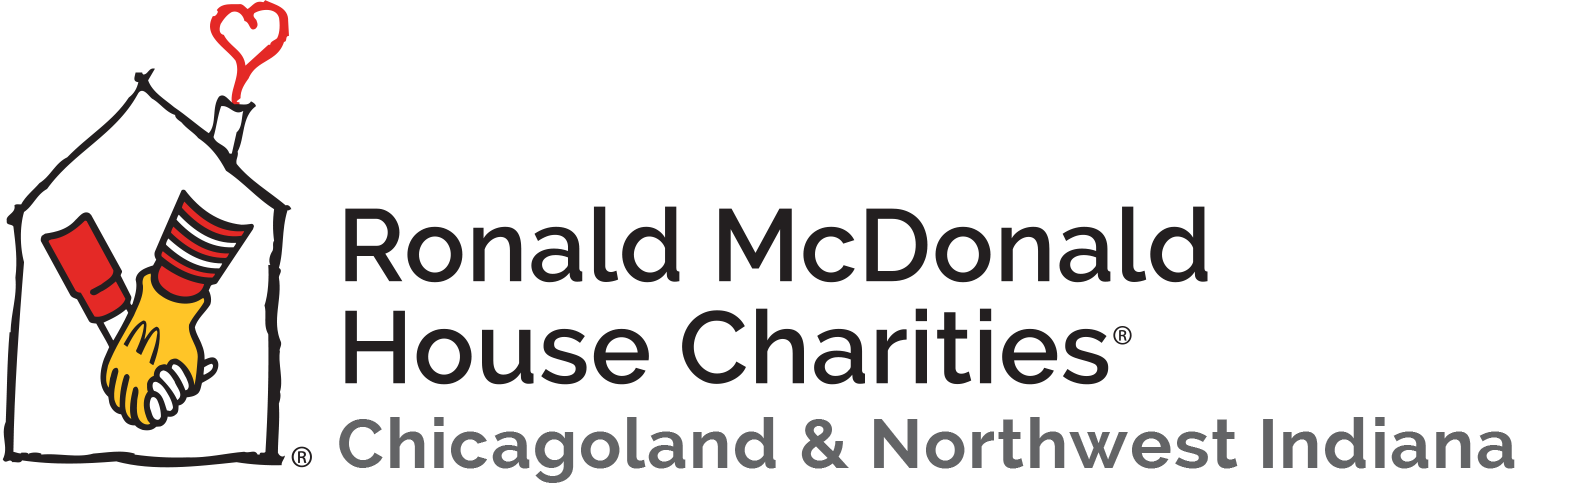 Ronald McDonald House Charities of Chicagoland and Northwest